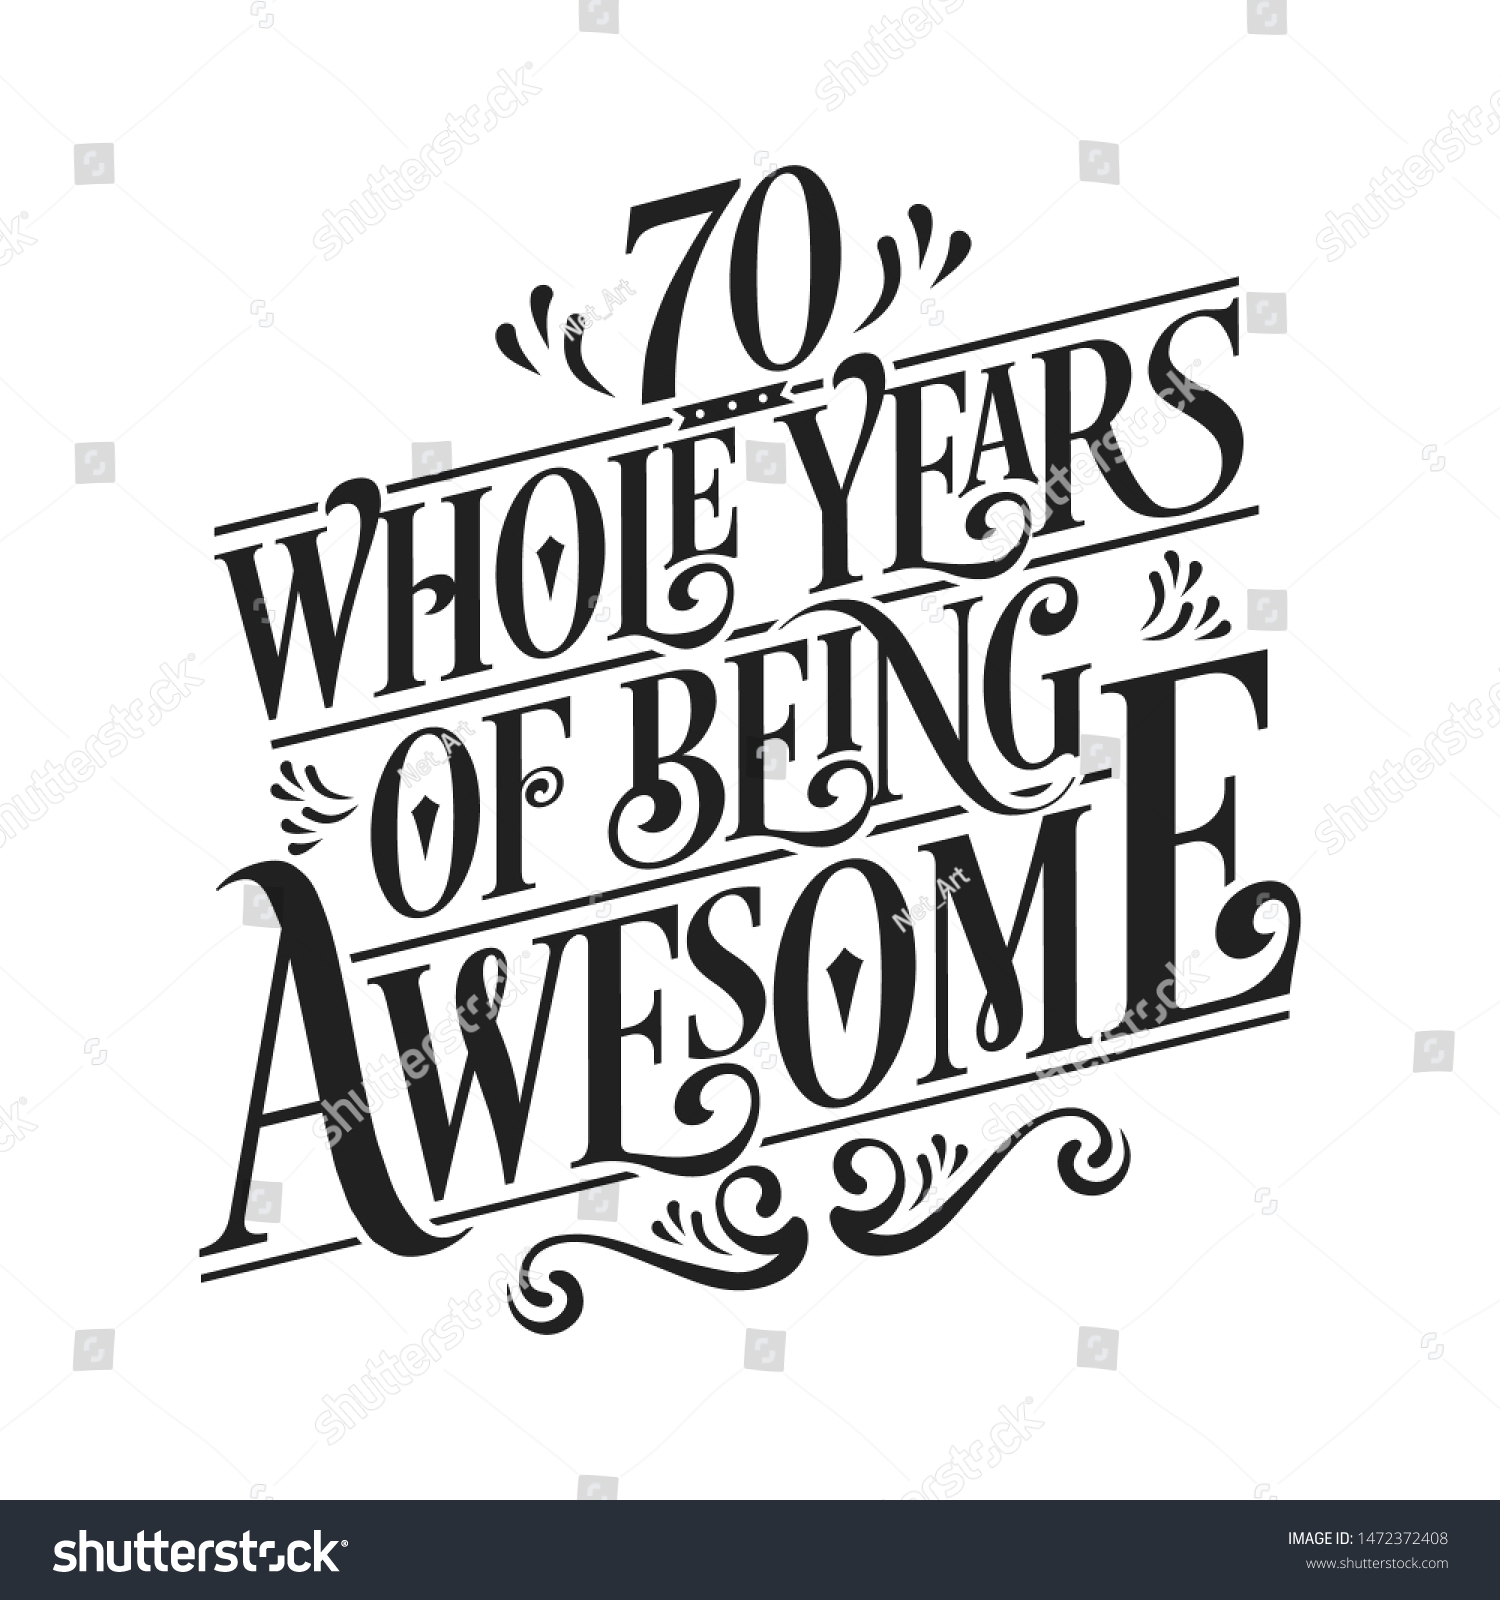 SVG of 70 Whole Years Of Being Awesome - 70th Birthday And Wedding  Anniversary Typographic Design Vector svg